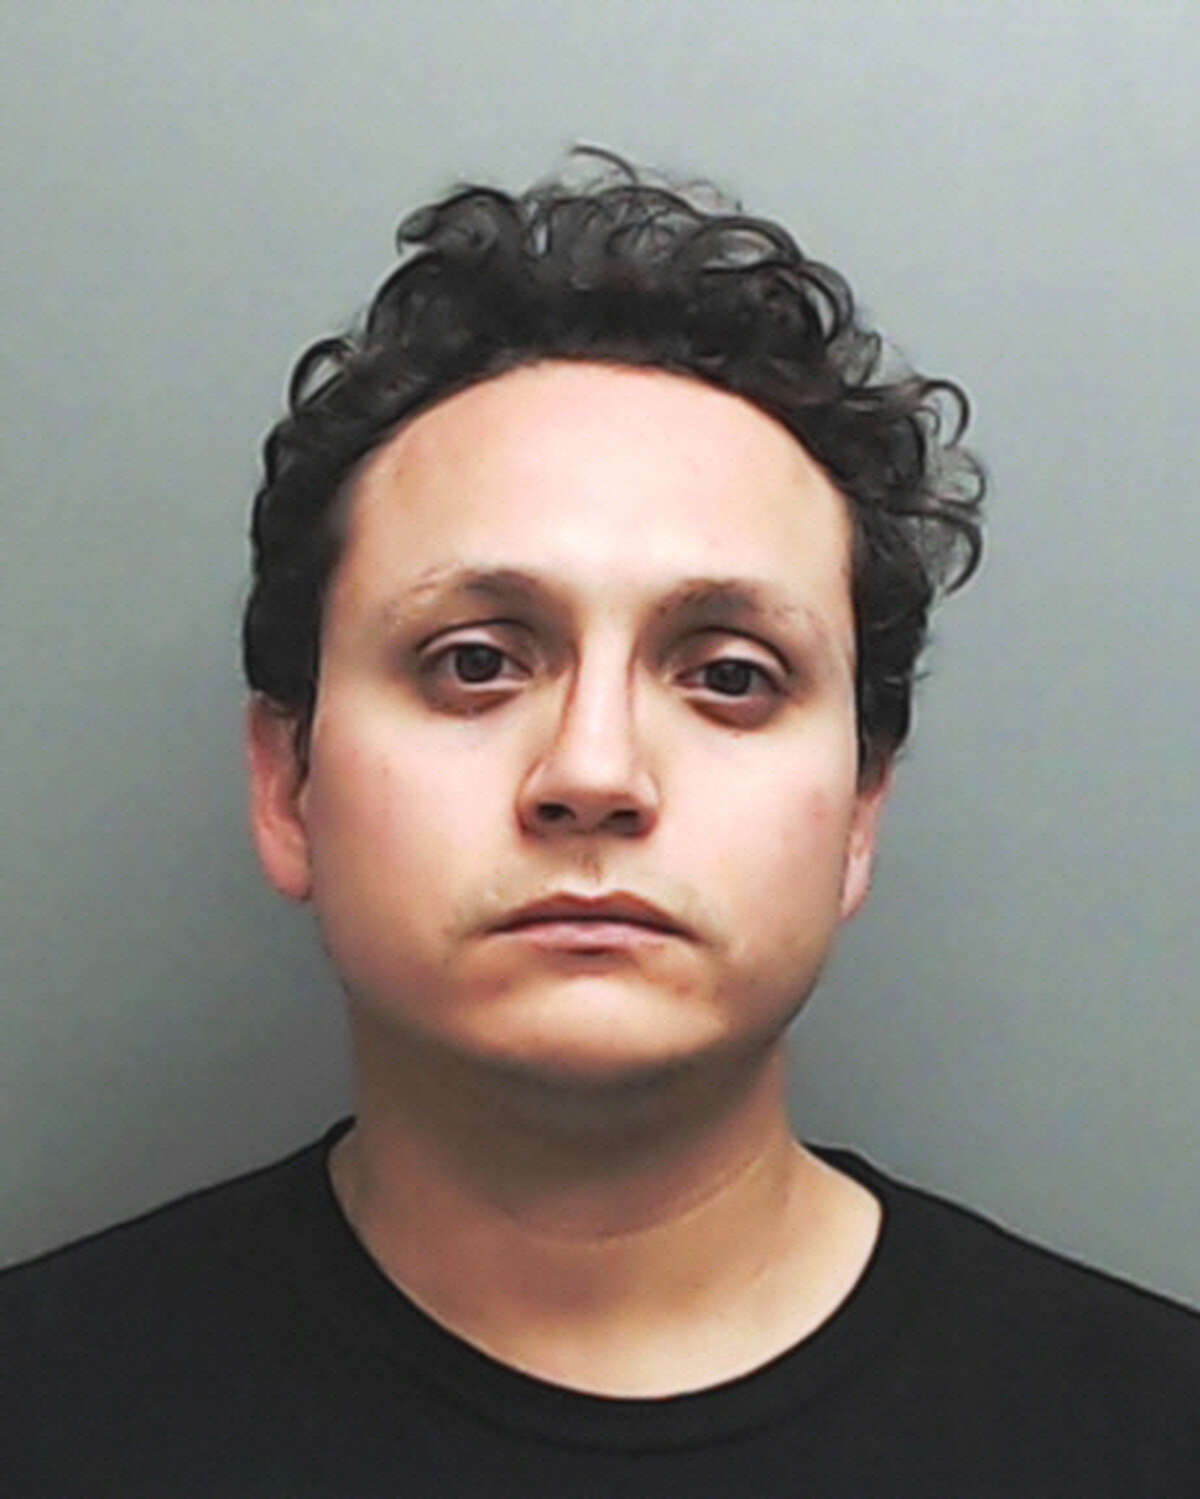 Ernesto Baldivia, 33, was arrested in San Marcos June 8, 2017 and charged with 10 counts of child pornography.